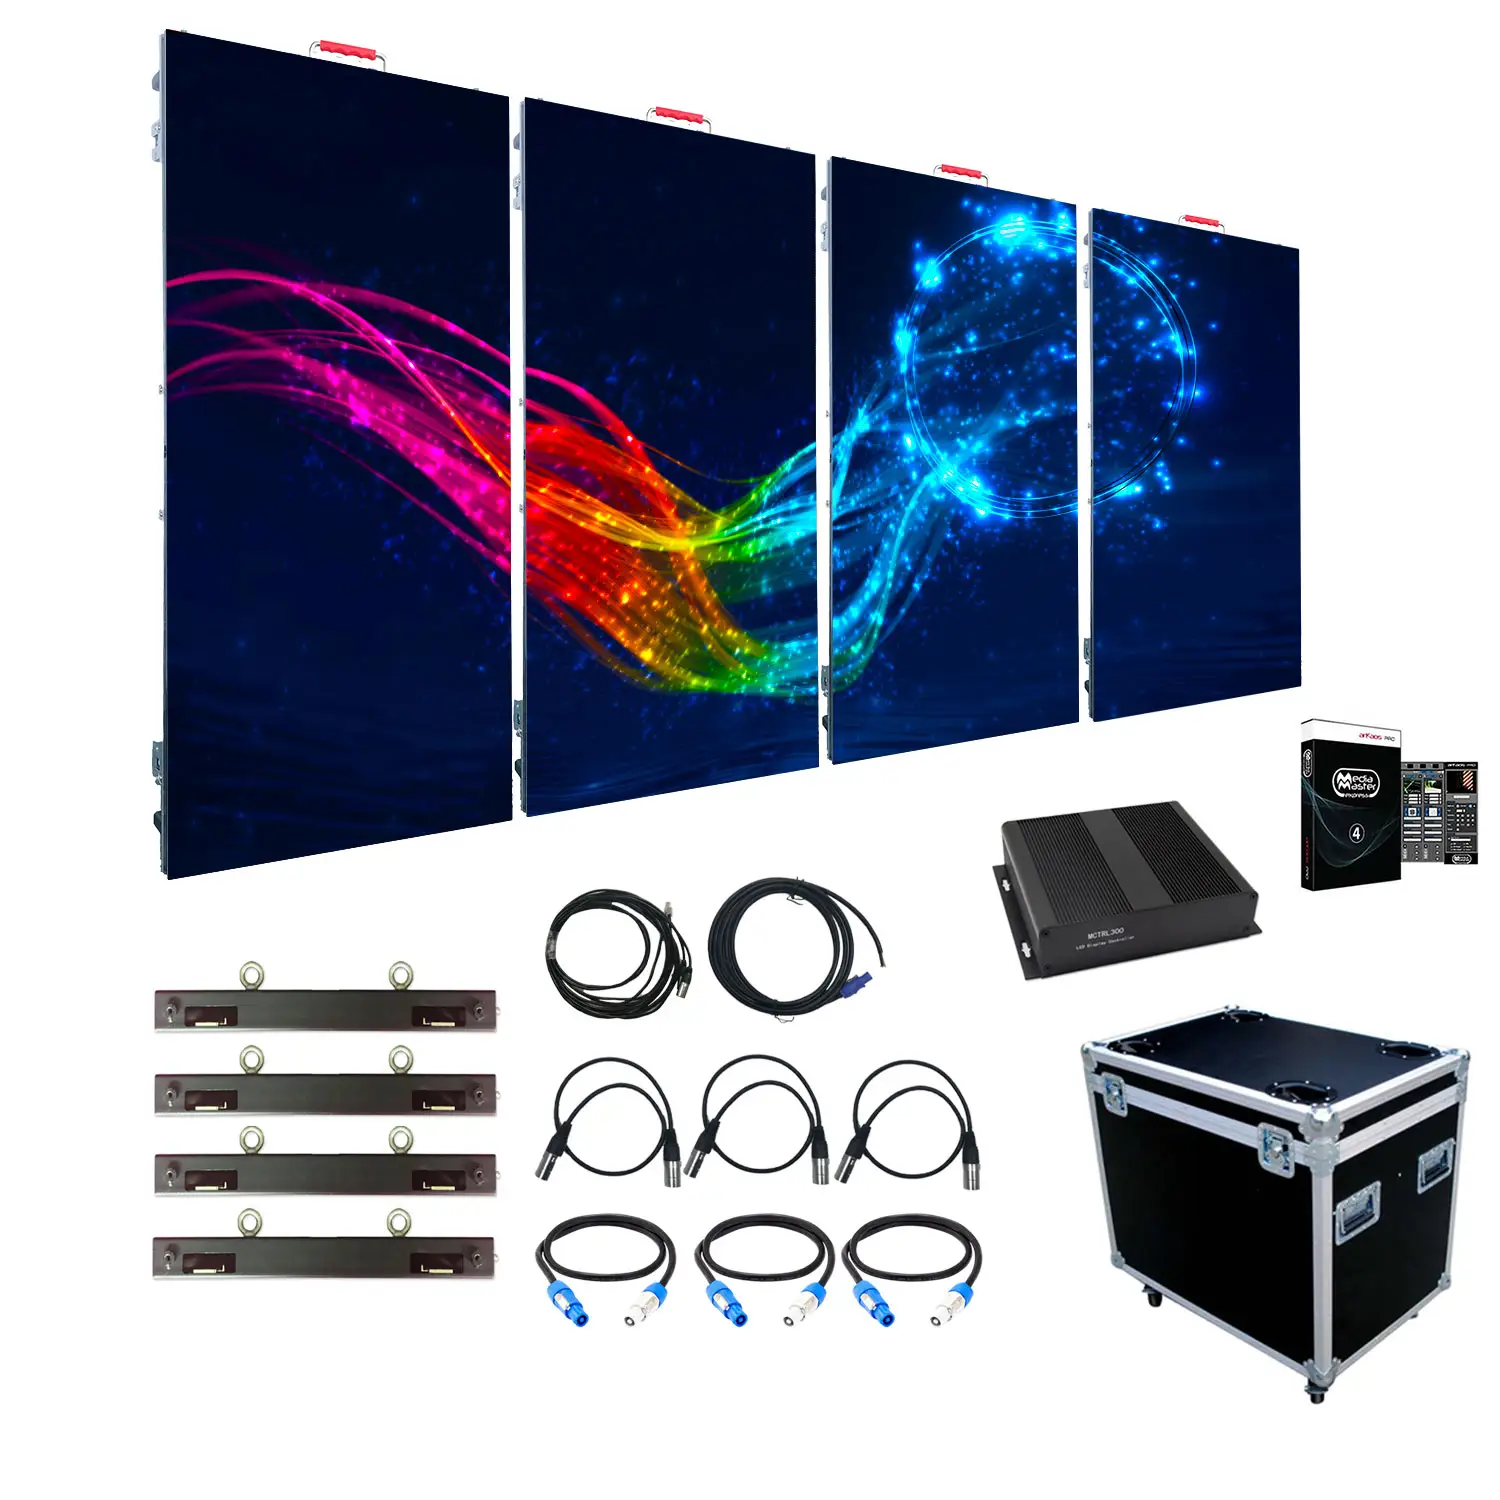 500x1000 Rental Led Display Wall Indoor P3.91 Led Display Stage Backdrop Screen Led Video Wall For Concert